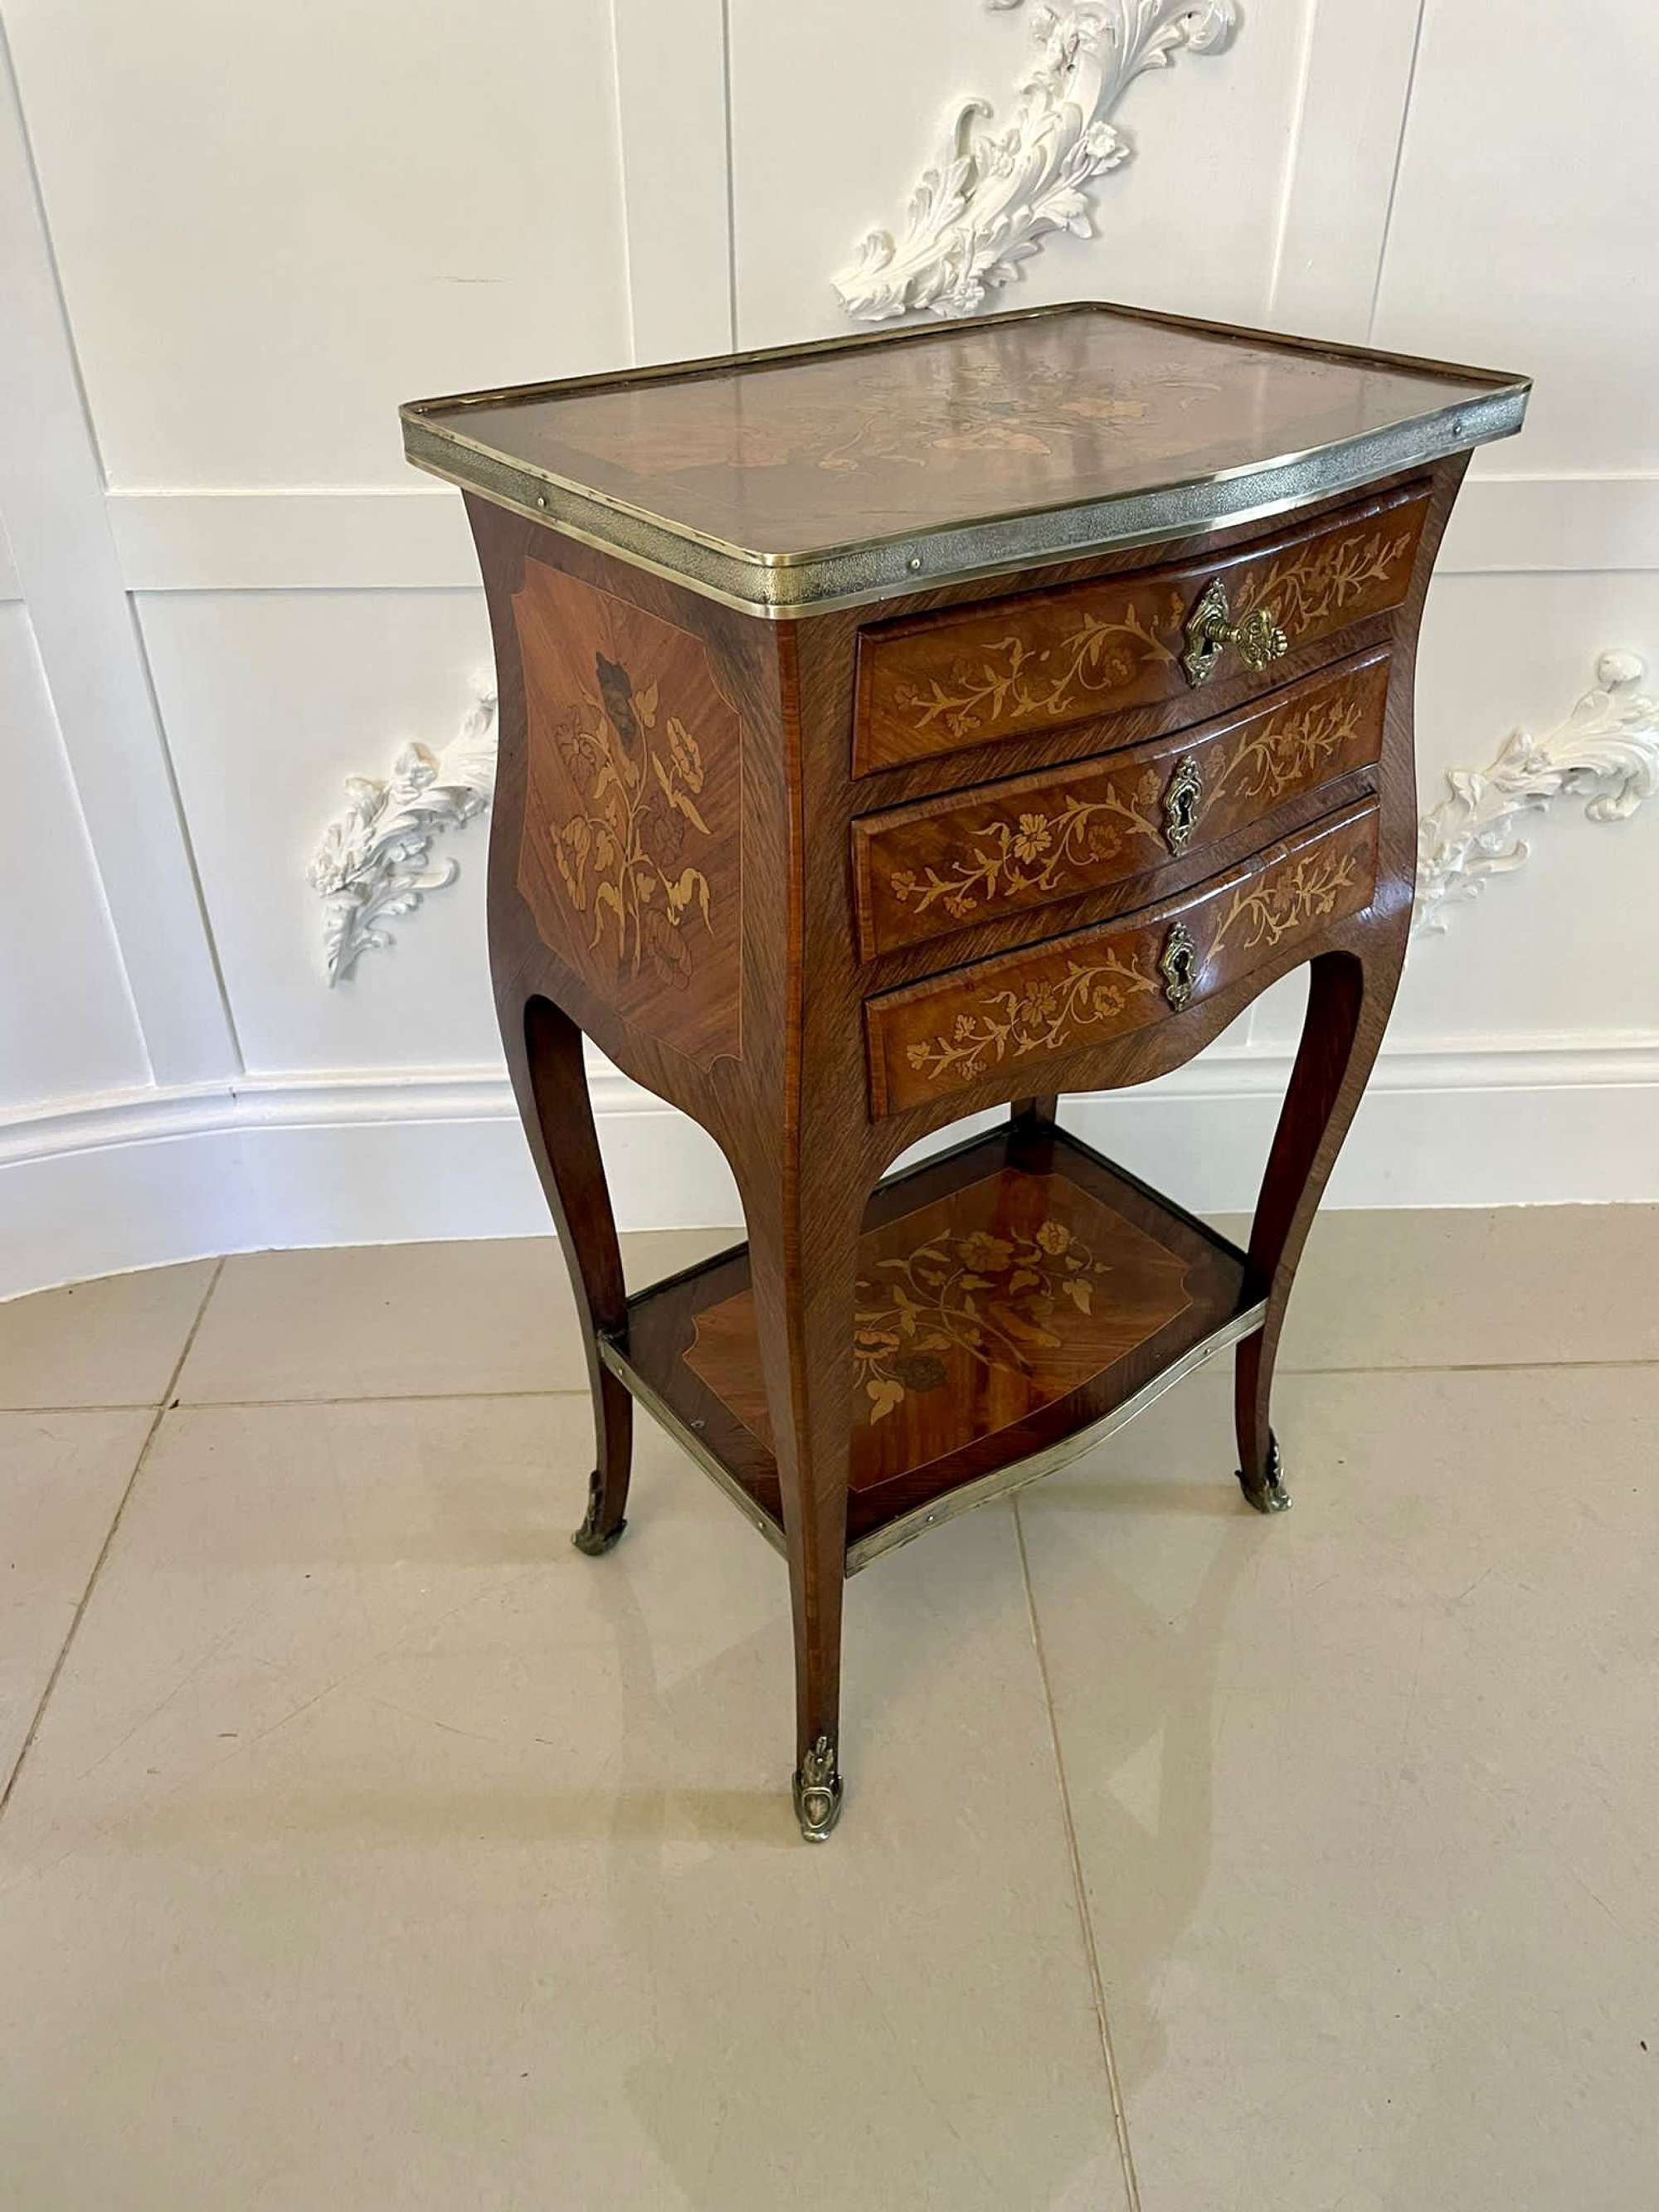 Antique Freestanding Marquetry Inlaid Kingwood Chest Of Drawers